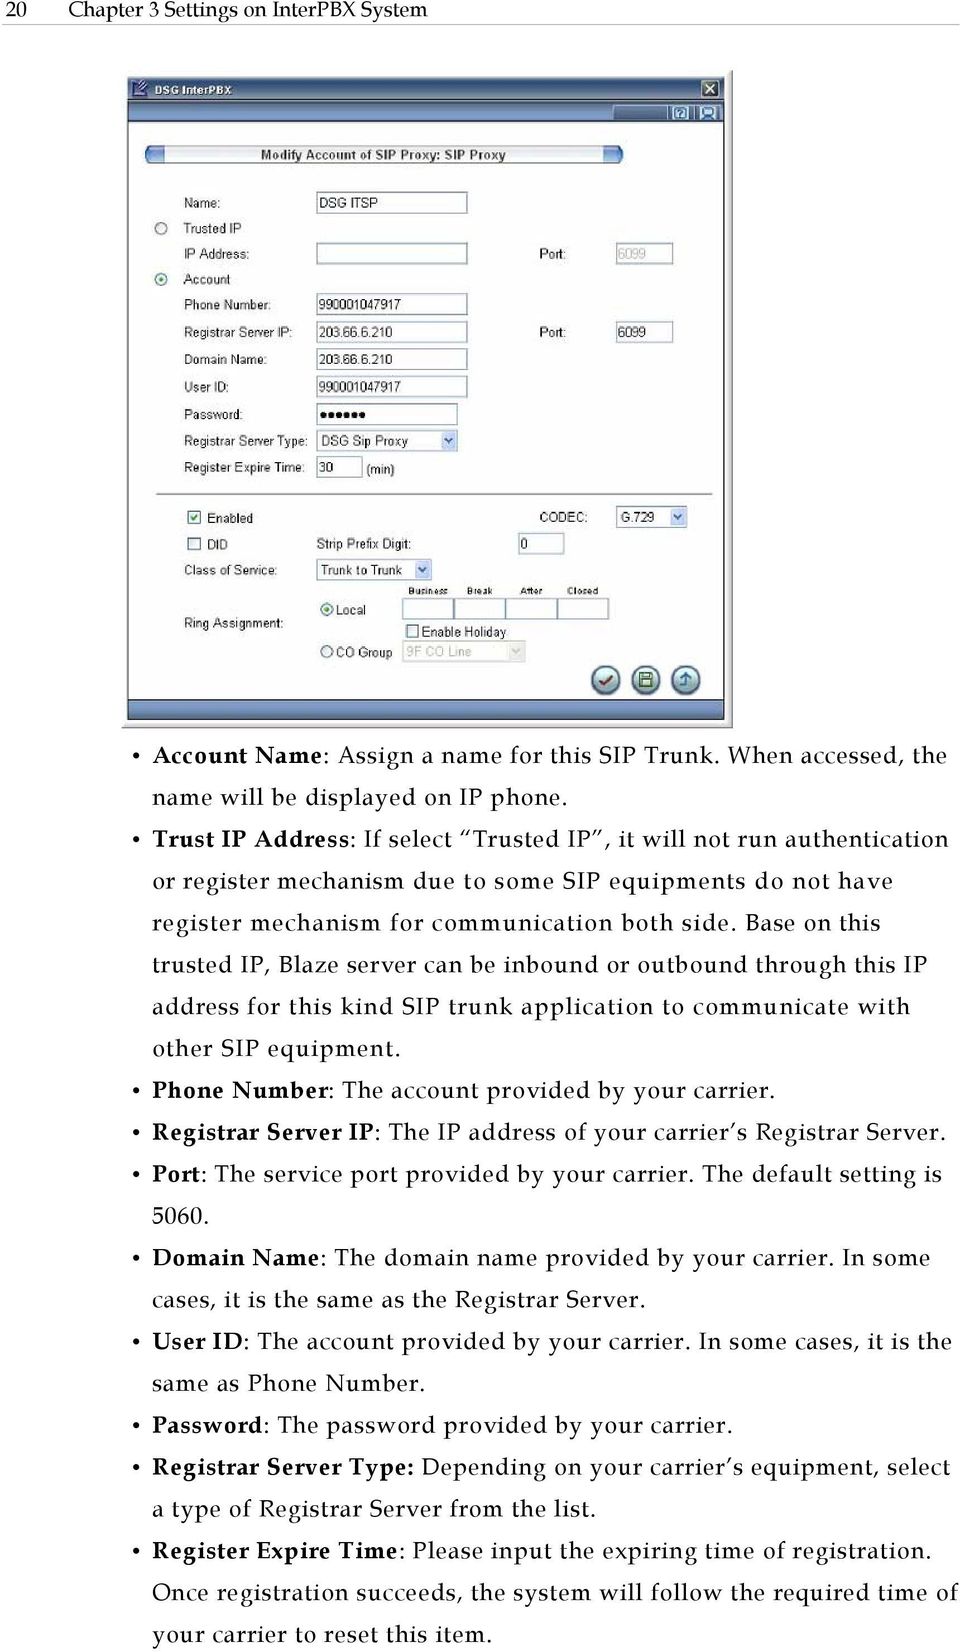 Base on this trusted IP, Blaze server can be inbound or outbound through this IP address for this kind SIP trunk application to communicate with other SIP equipment.